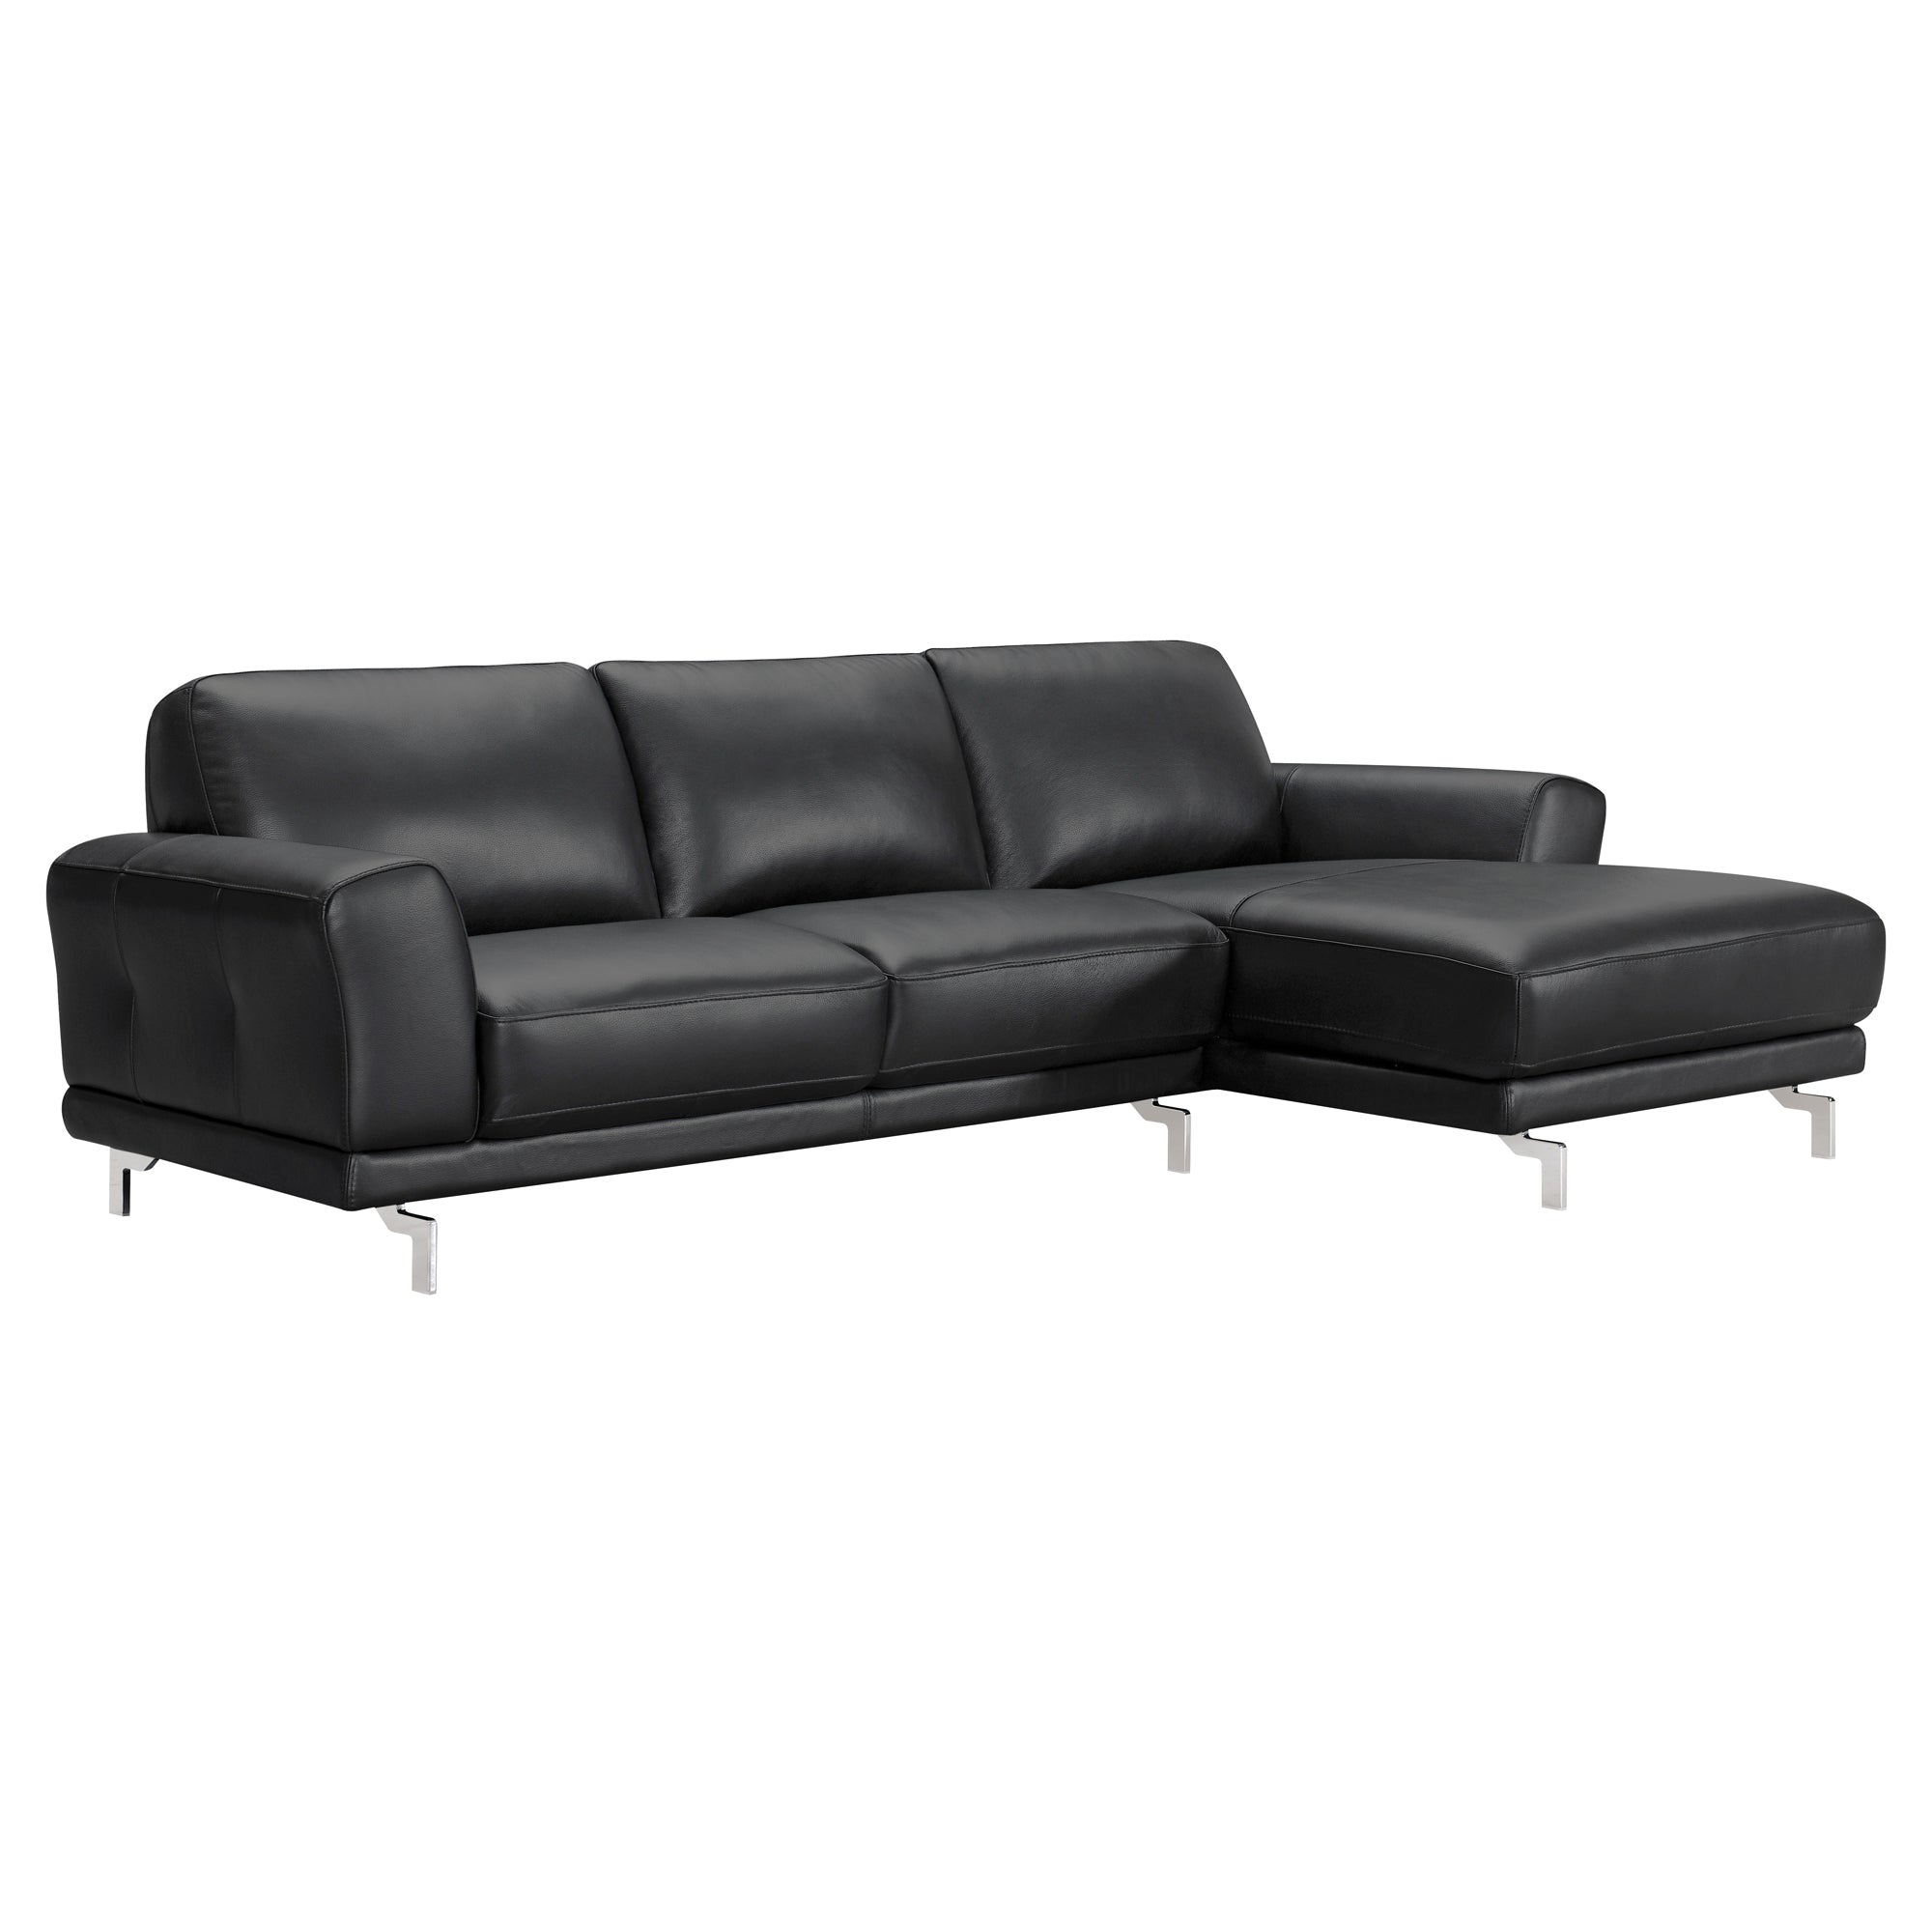 Armen Living Lcevsebl Everly Contemporary Sectional In Genuine Black Leather With Brushed Stainless Steel Legs